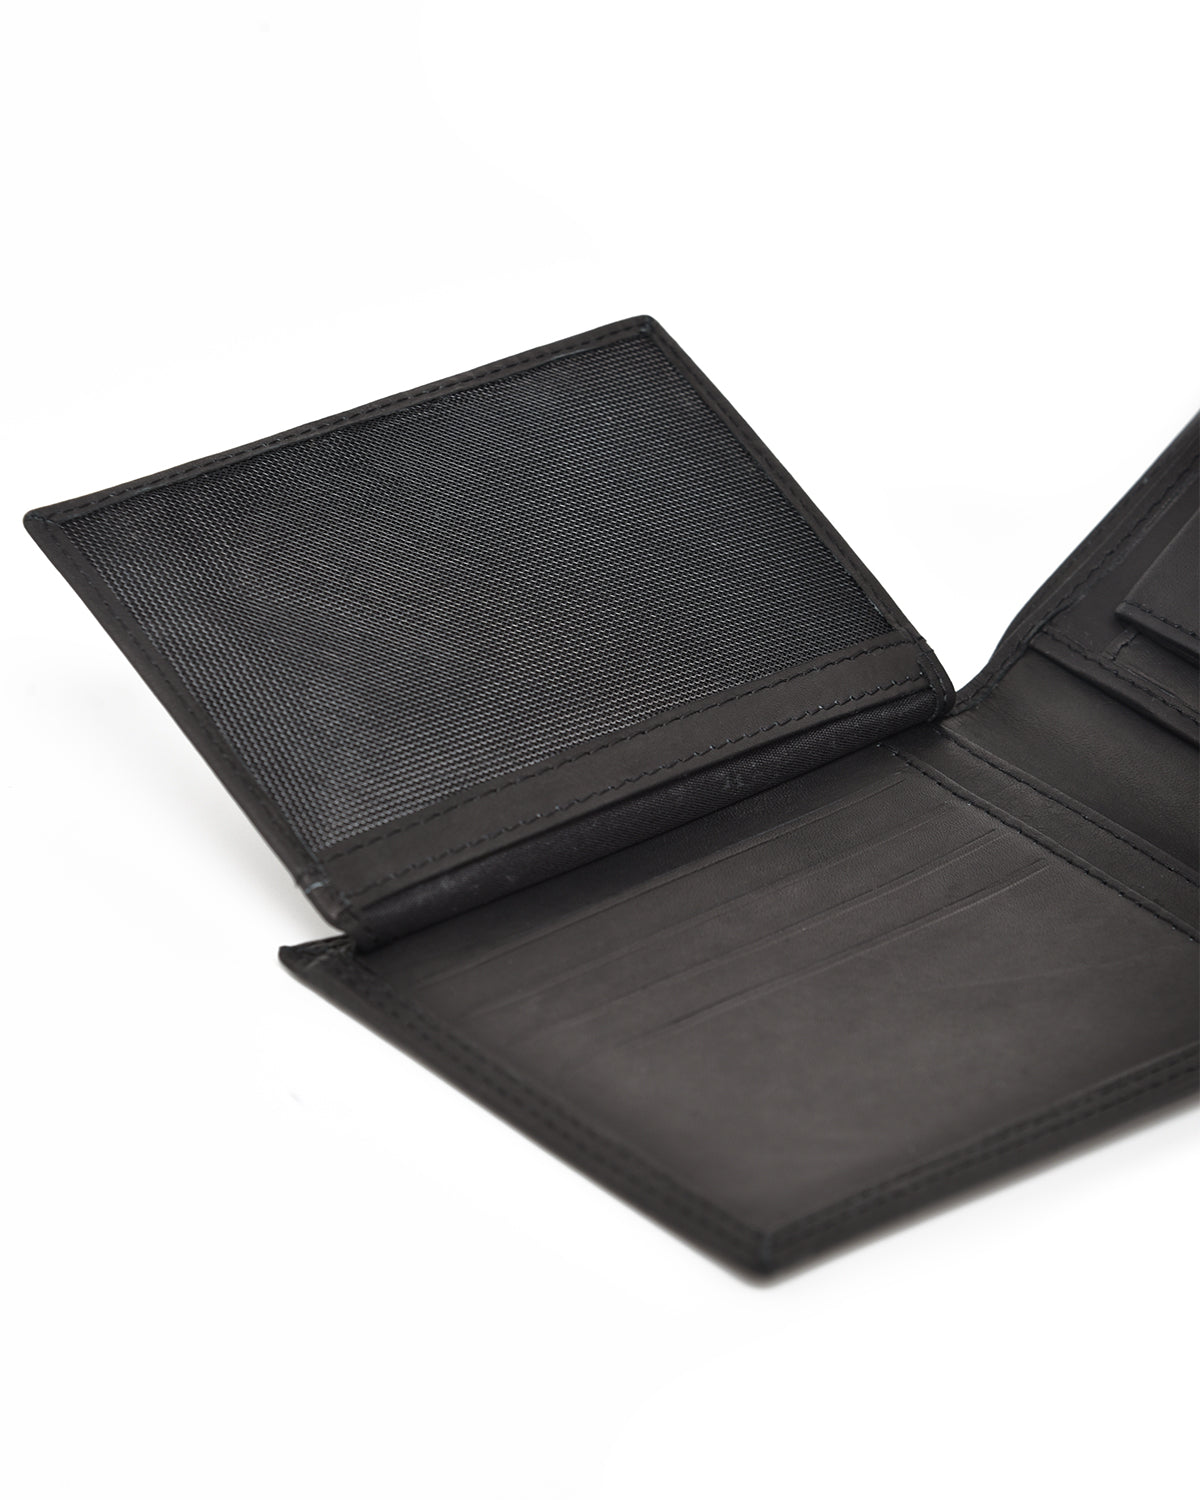 Smooth Eco-Leather Wallet With Embossed Scoprion Bay Logo